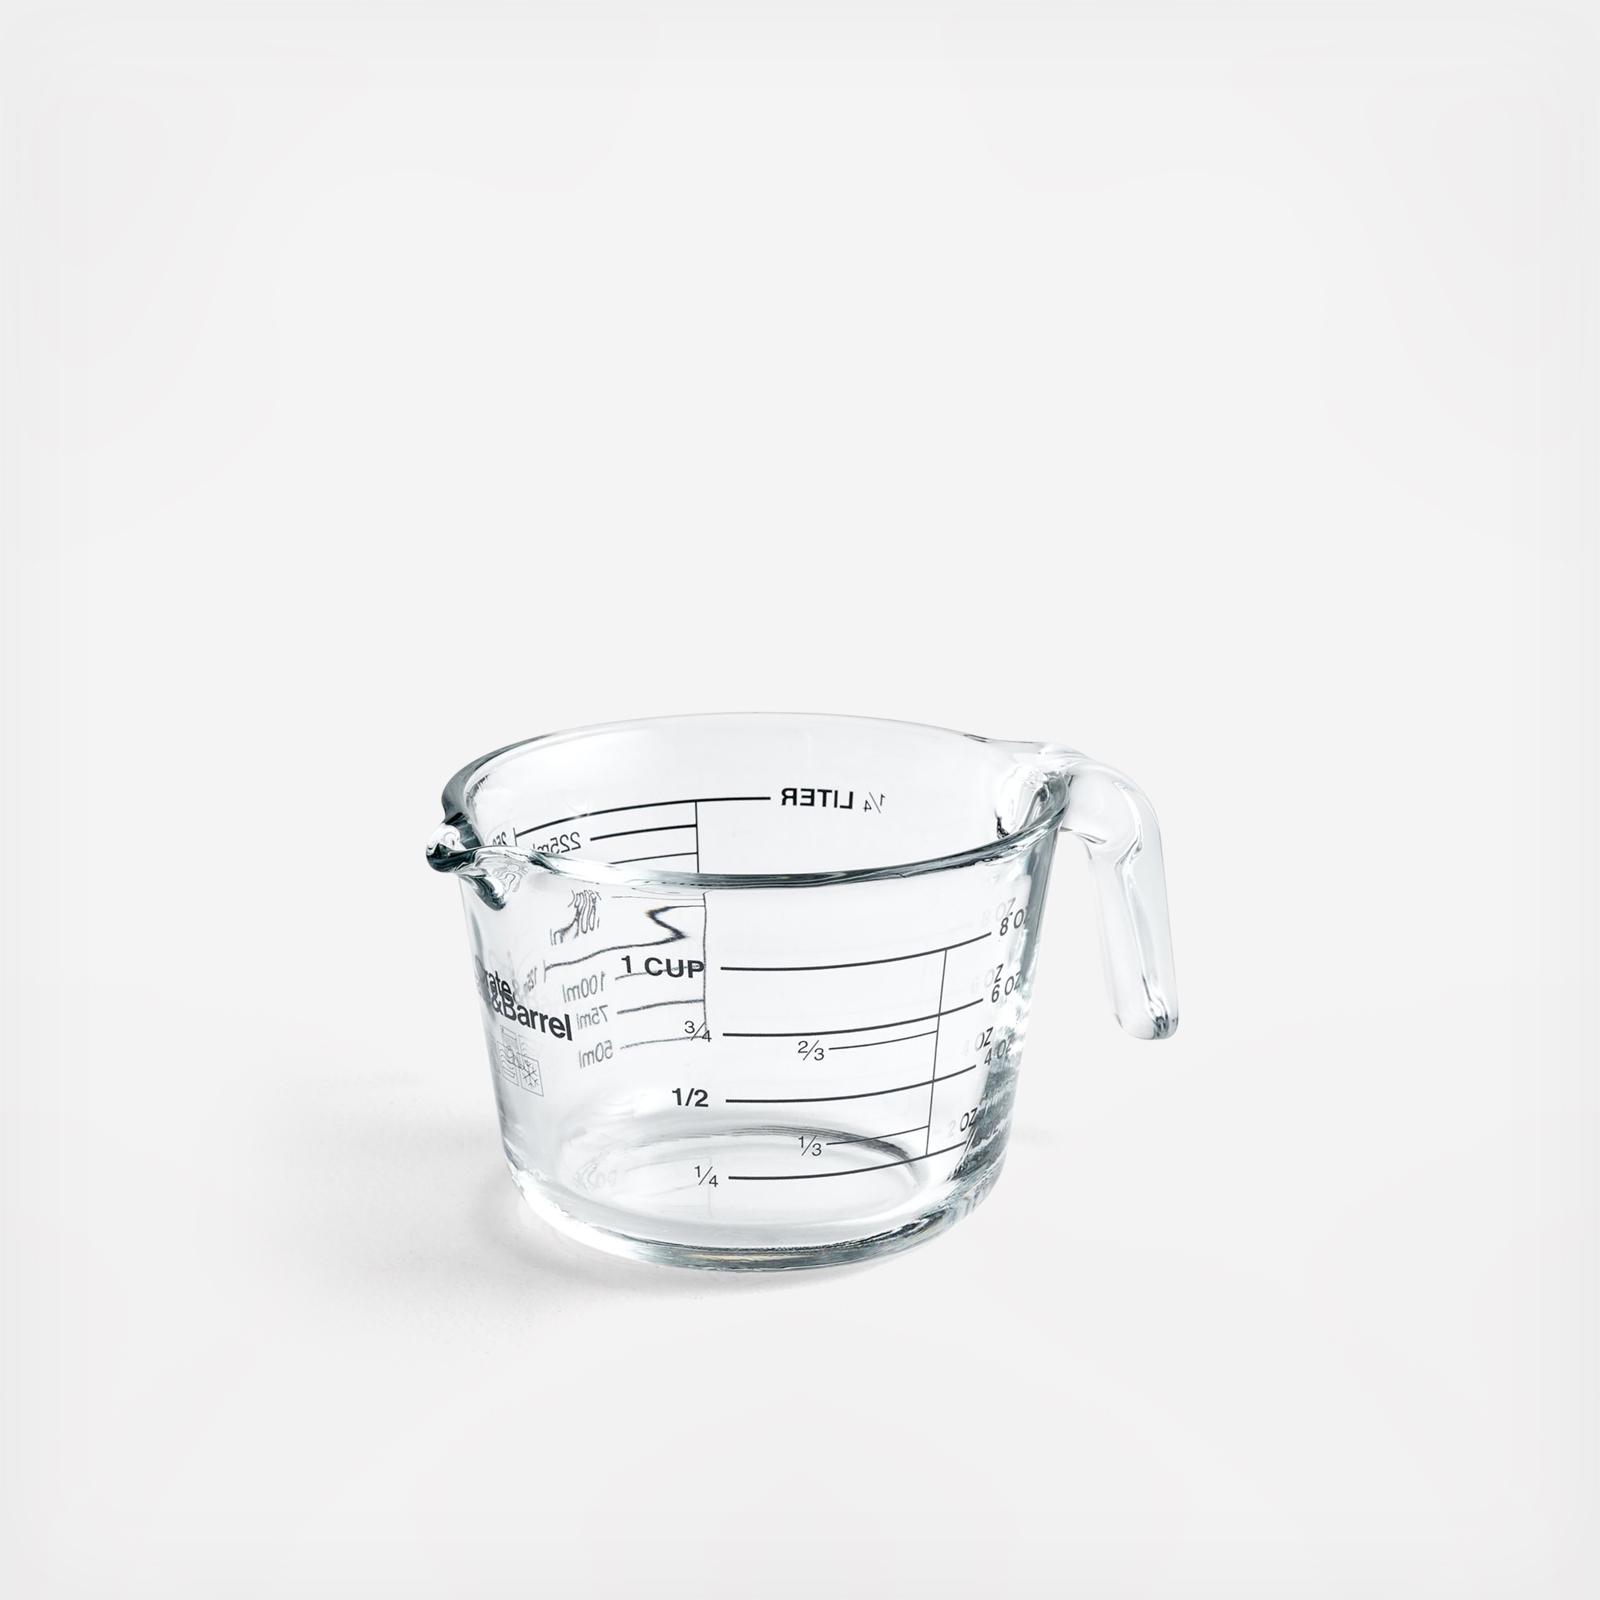 Crate and Barrel 1-Cup Glass Measuring Cup